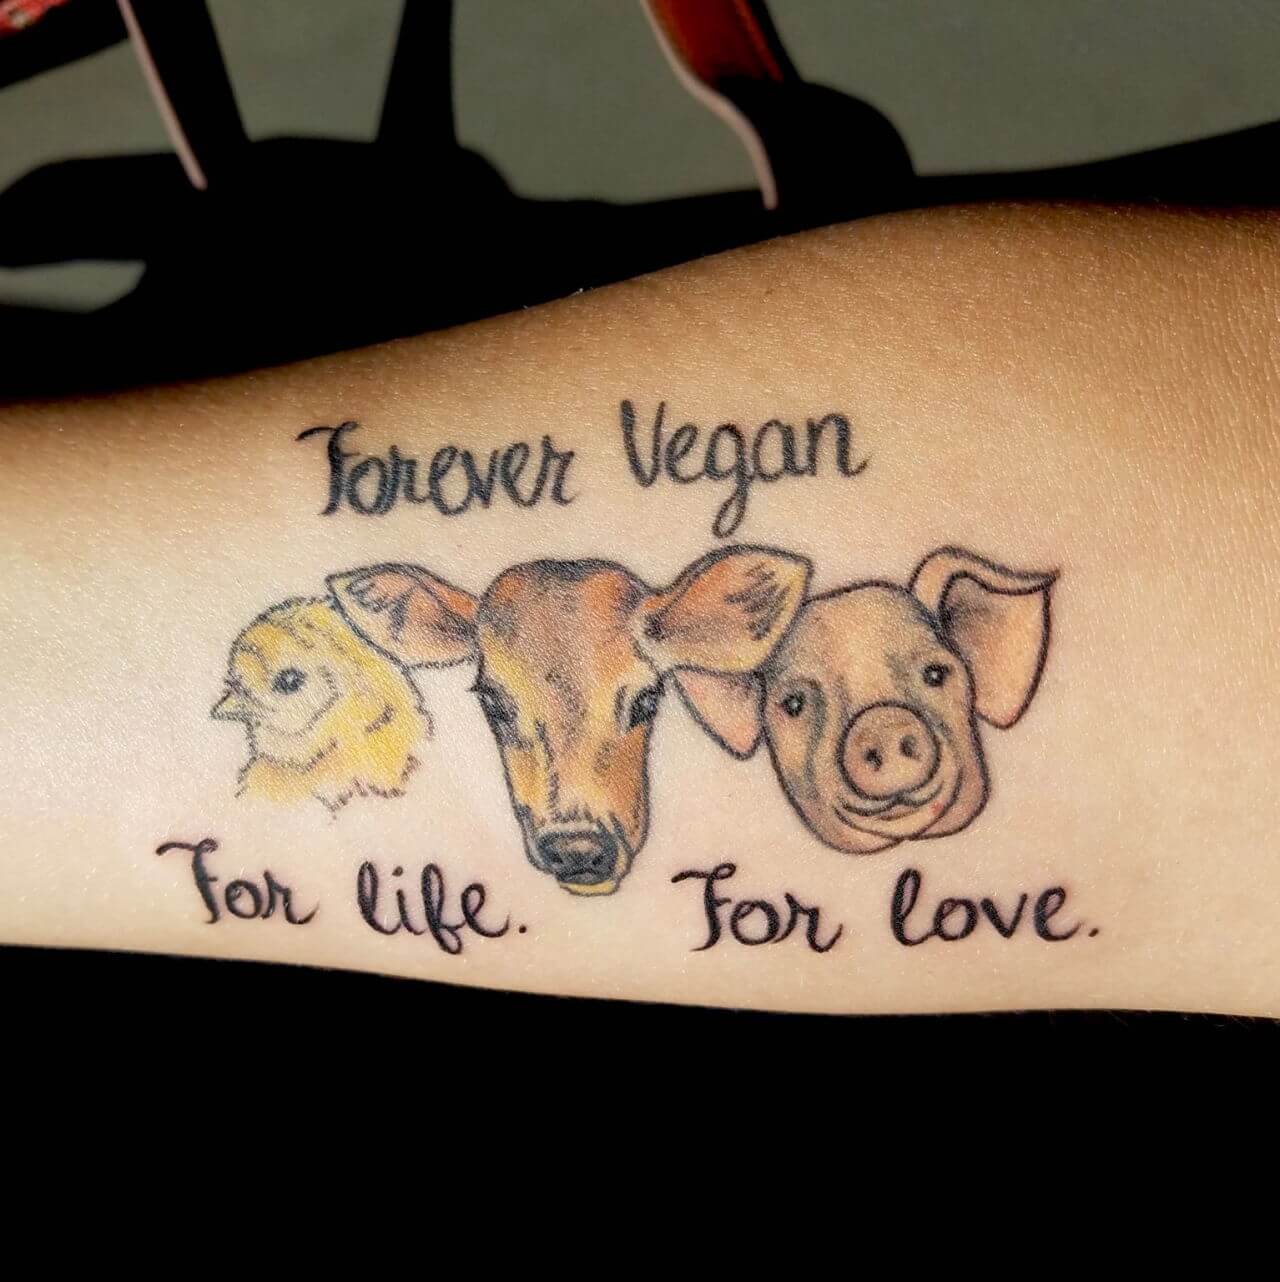 dailyanimalfwd Inky and perky But poor tattooed pigs have animal rights  campaigners sizzling in anger